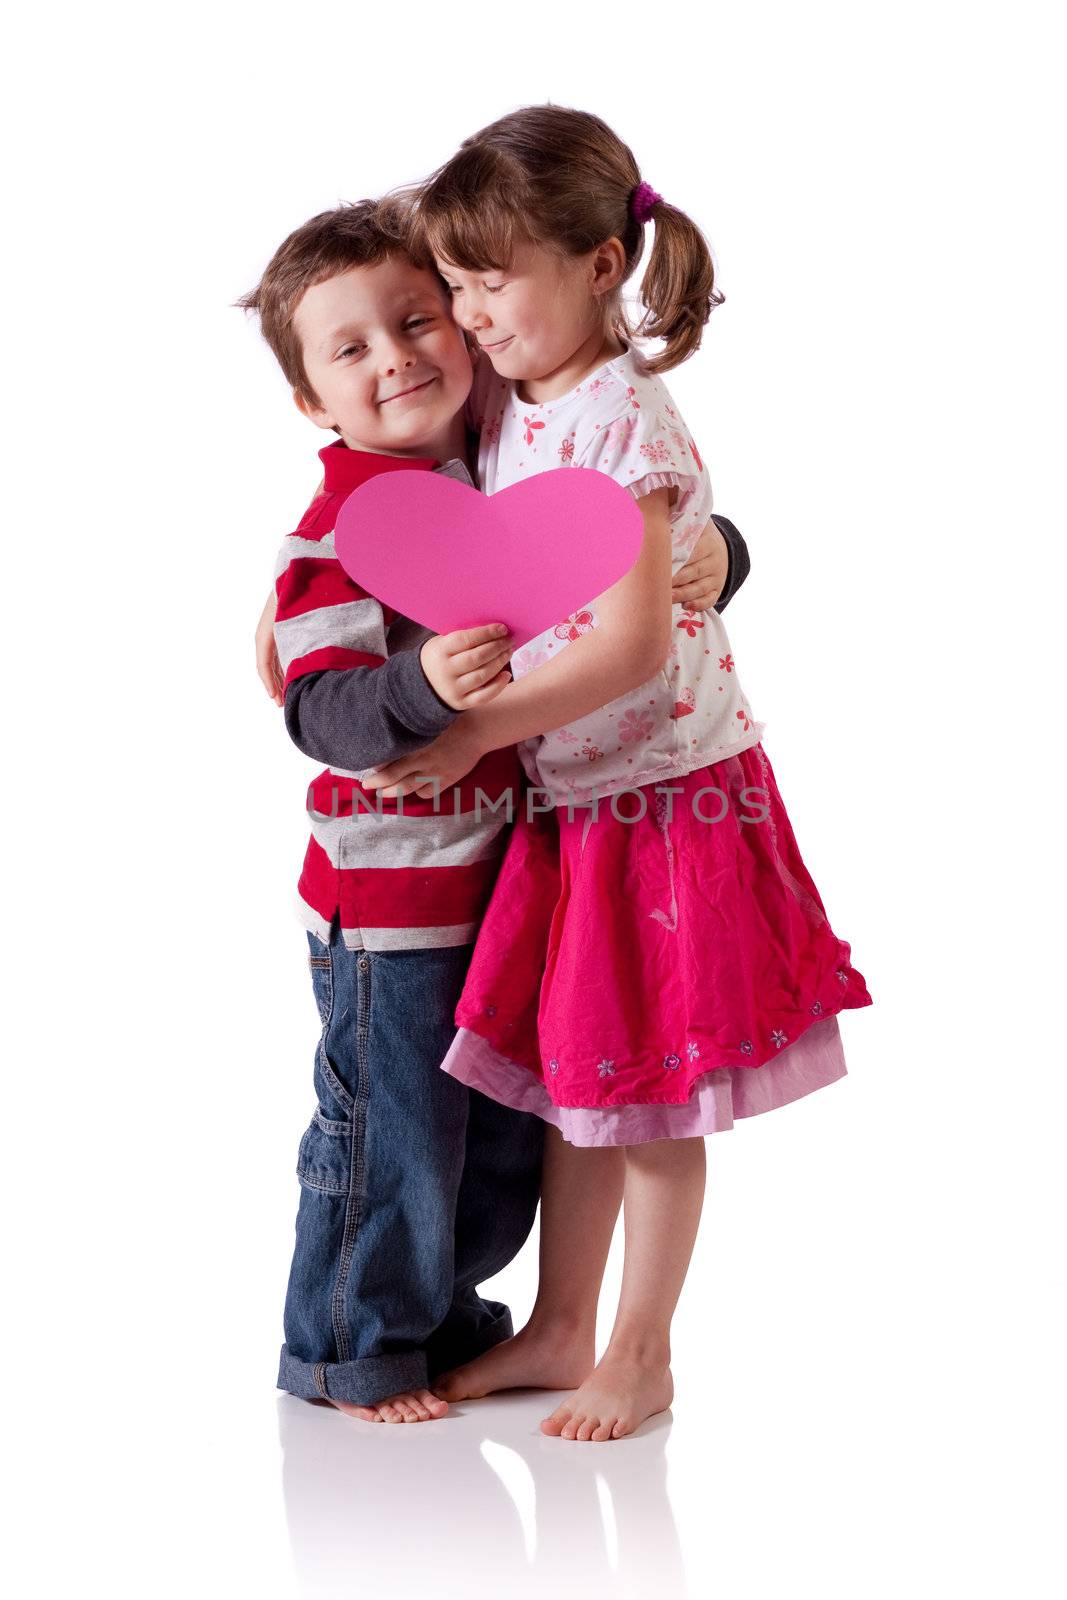 Cute little children hugging and holding a pink heart